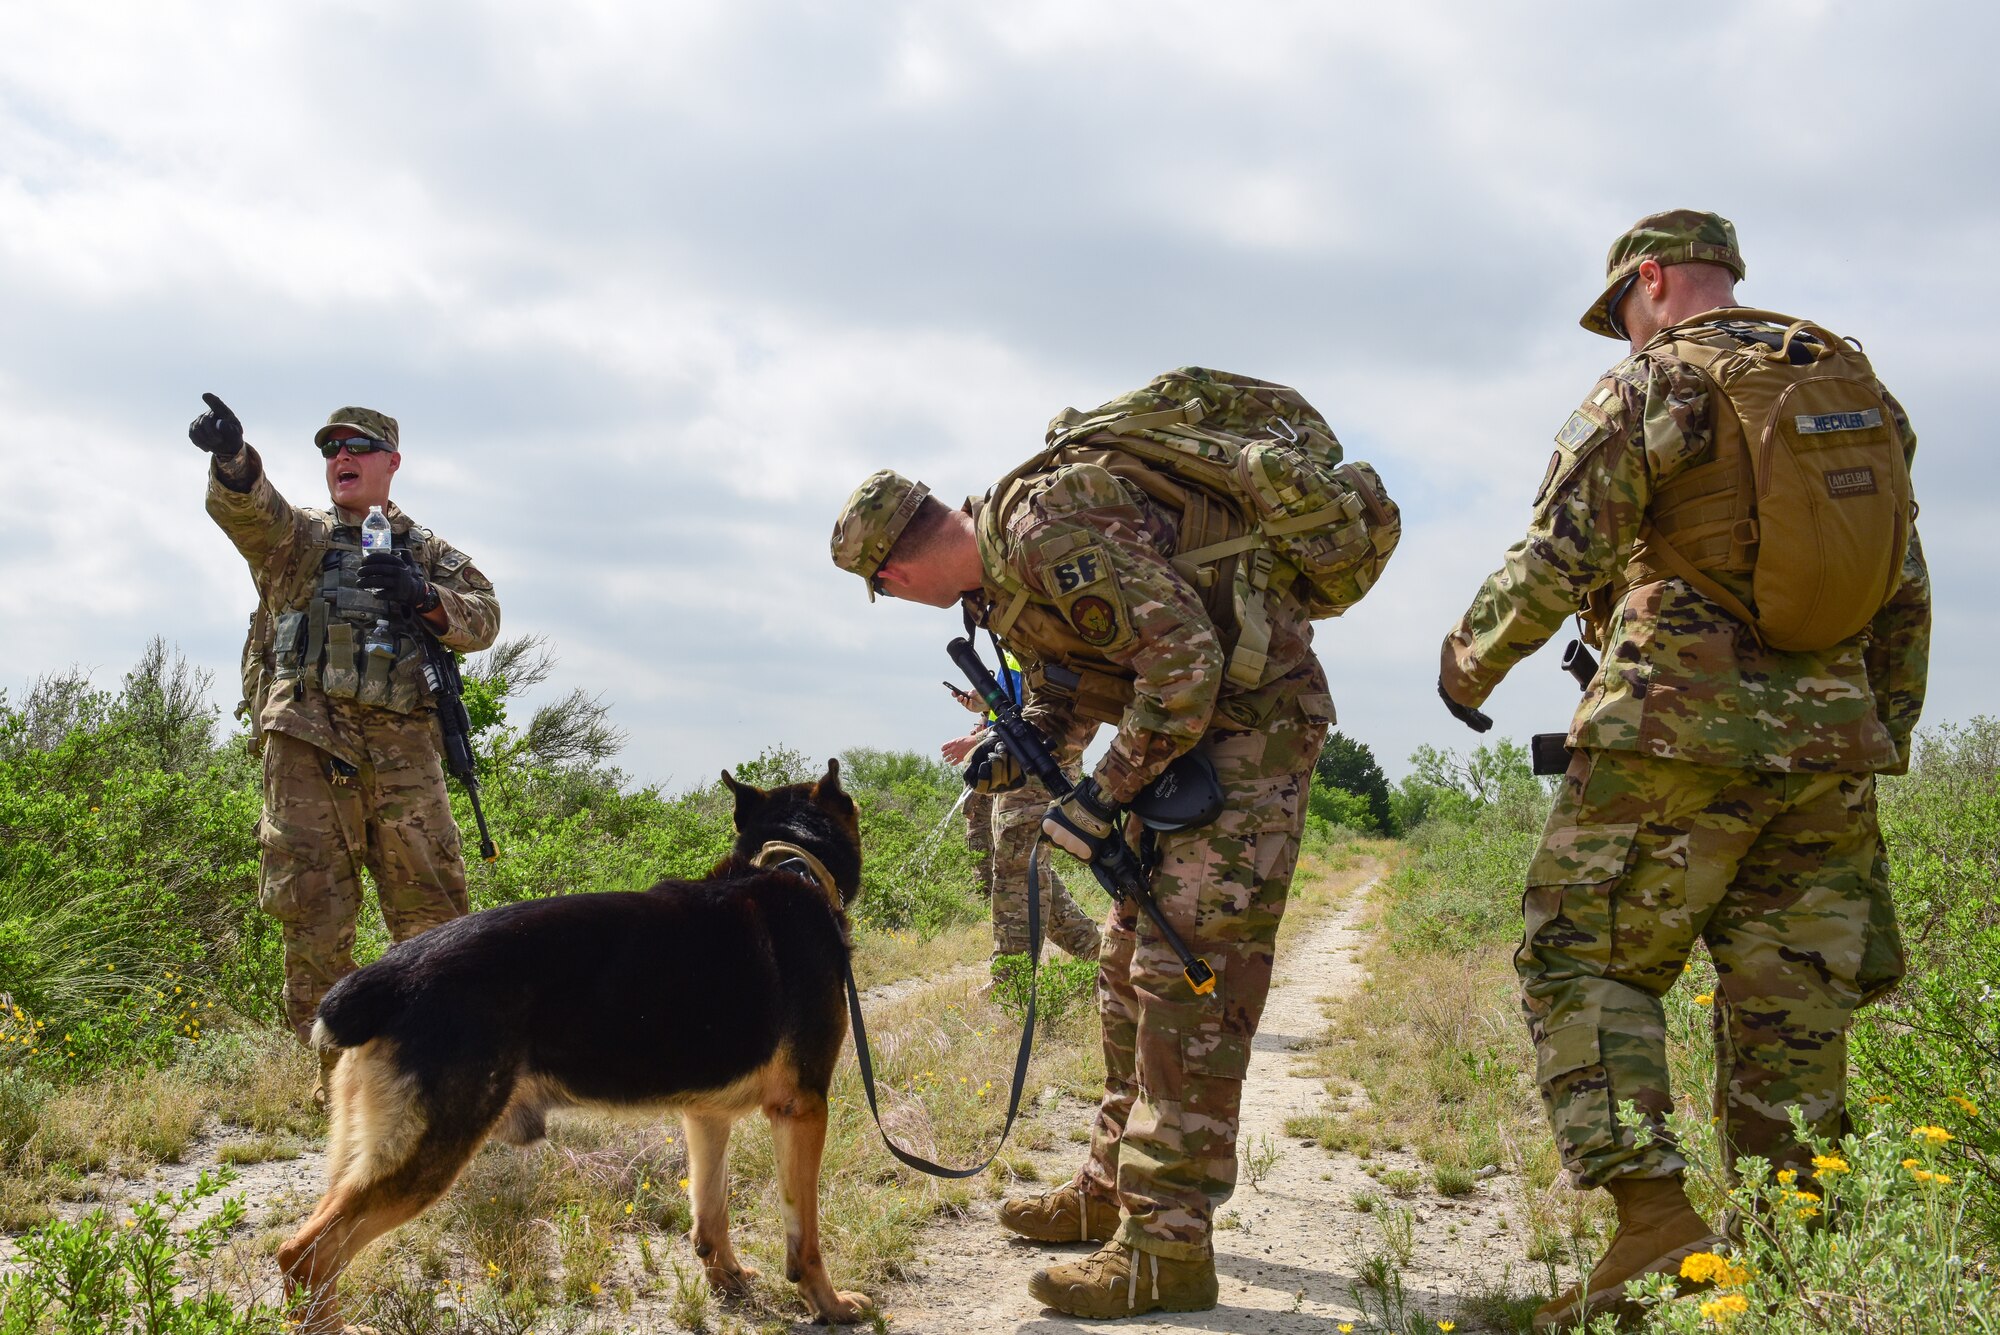 Military working dog handlers with the 47th Security Forces Squadron, regroup after an engagement with simulated opposing forces during an exercise at Laughlin Air Force Base, Texas, April 17, 2019. The 47th SFS changed up the tempo with an exercise that challenged their tactics, teamwork and physical fitness as they were put head to head with a simulated opposing force. (U.S. Air Force photo by Senior Airman Benjamin N. Valmoja)